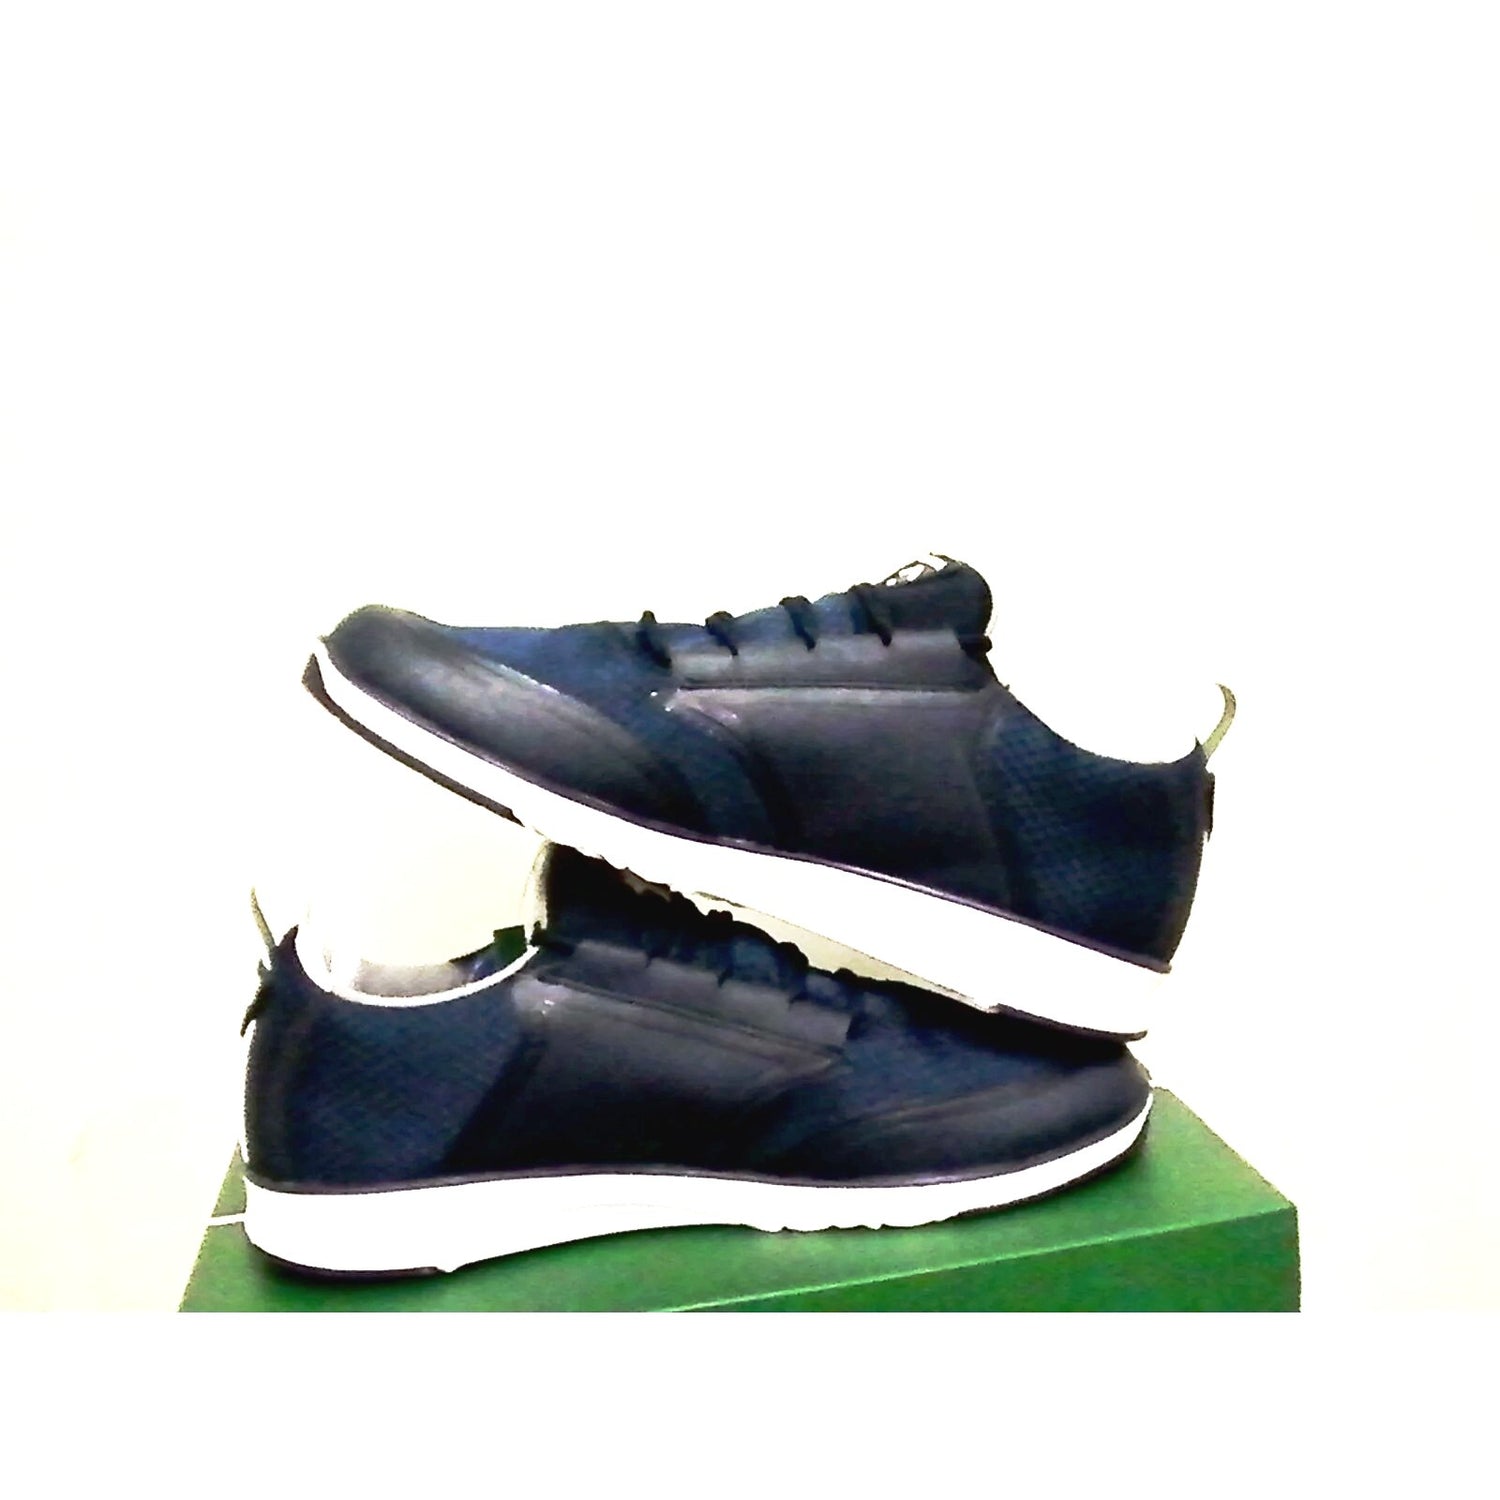 Lacoste shoes L.IGHT LT12 spm txt/syn dark blue training size 7.5 new with box